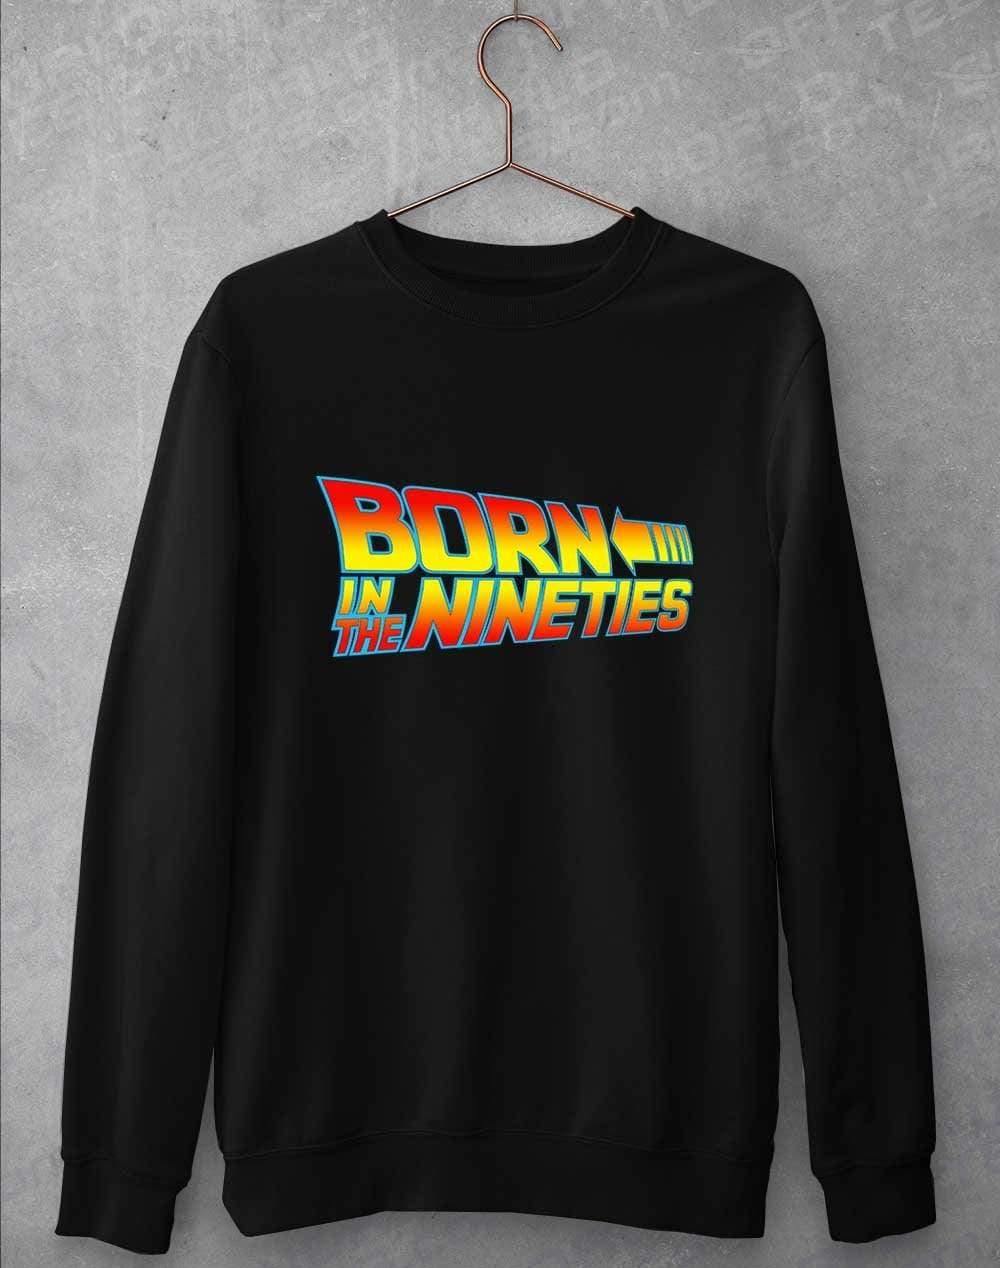 Born in the... (CHOOSE YOUR DECADE!) Sweatshirt 1990s - Black / S  - Off World Tees